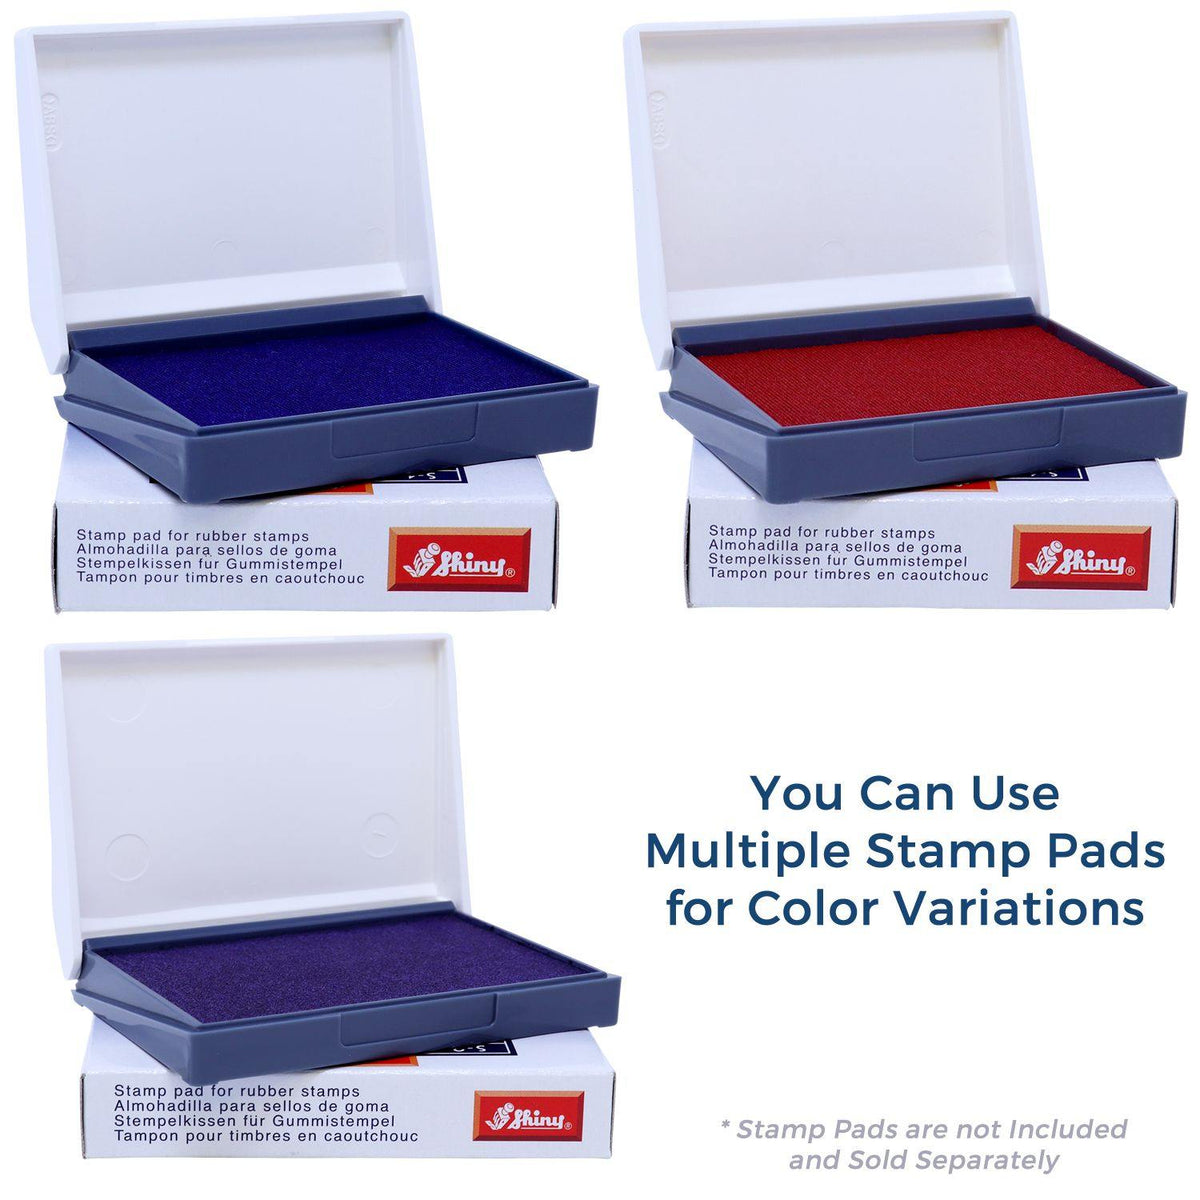 Stamp Pads for Fax Stamp Rubber Stamp Available